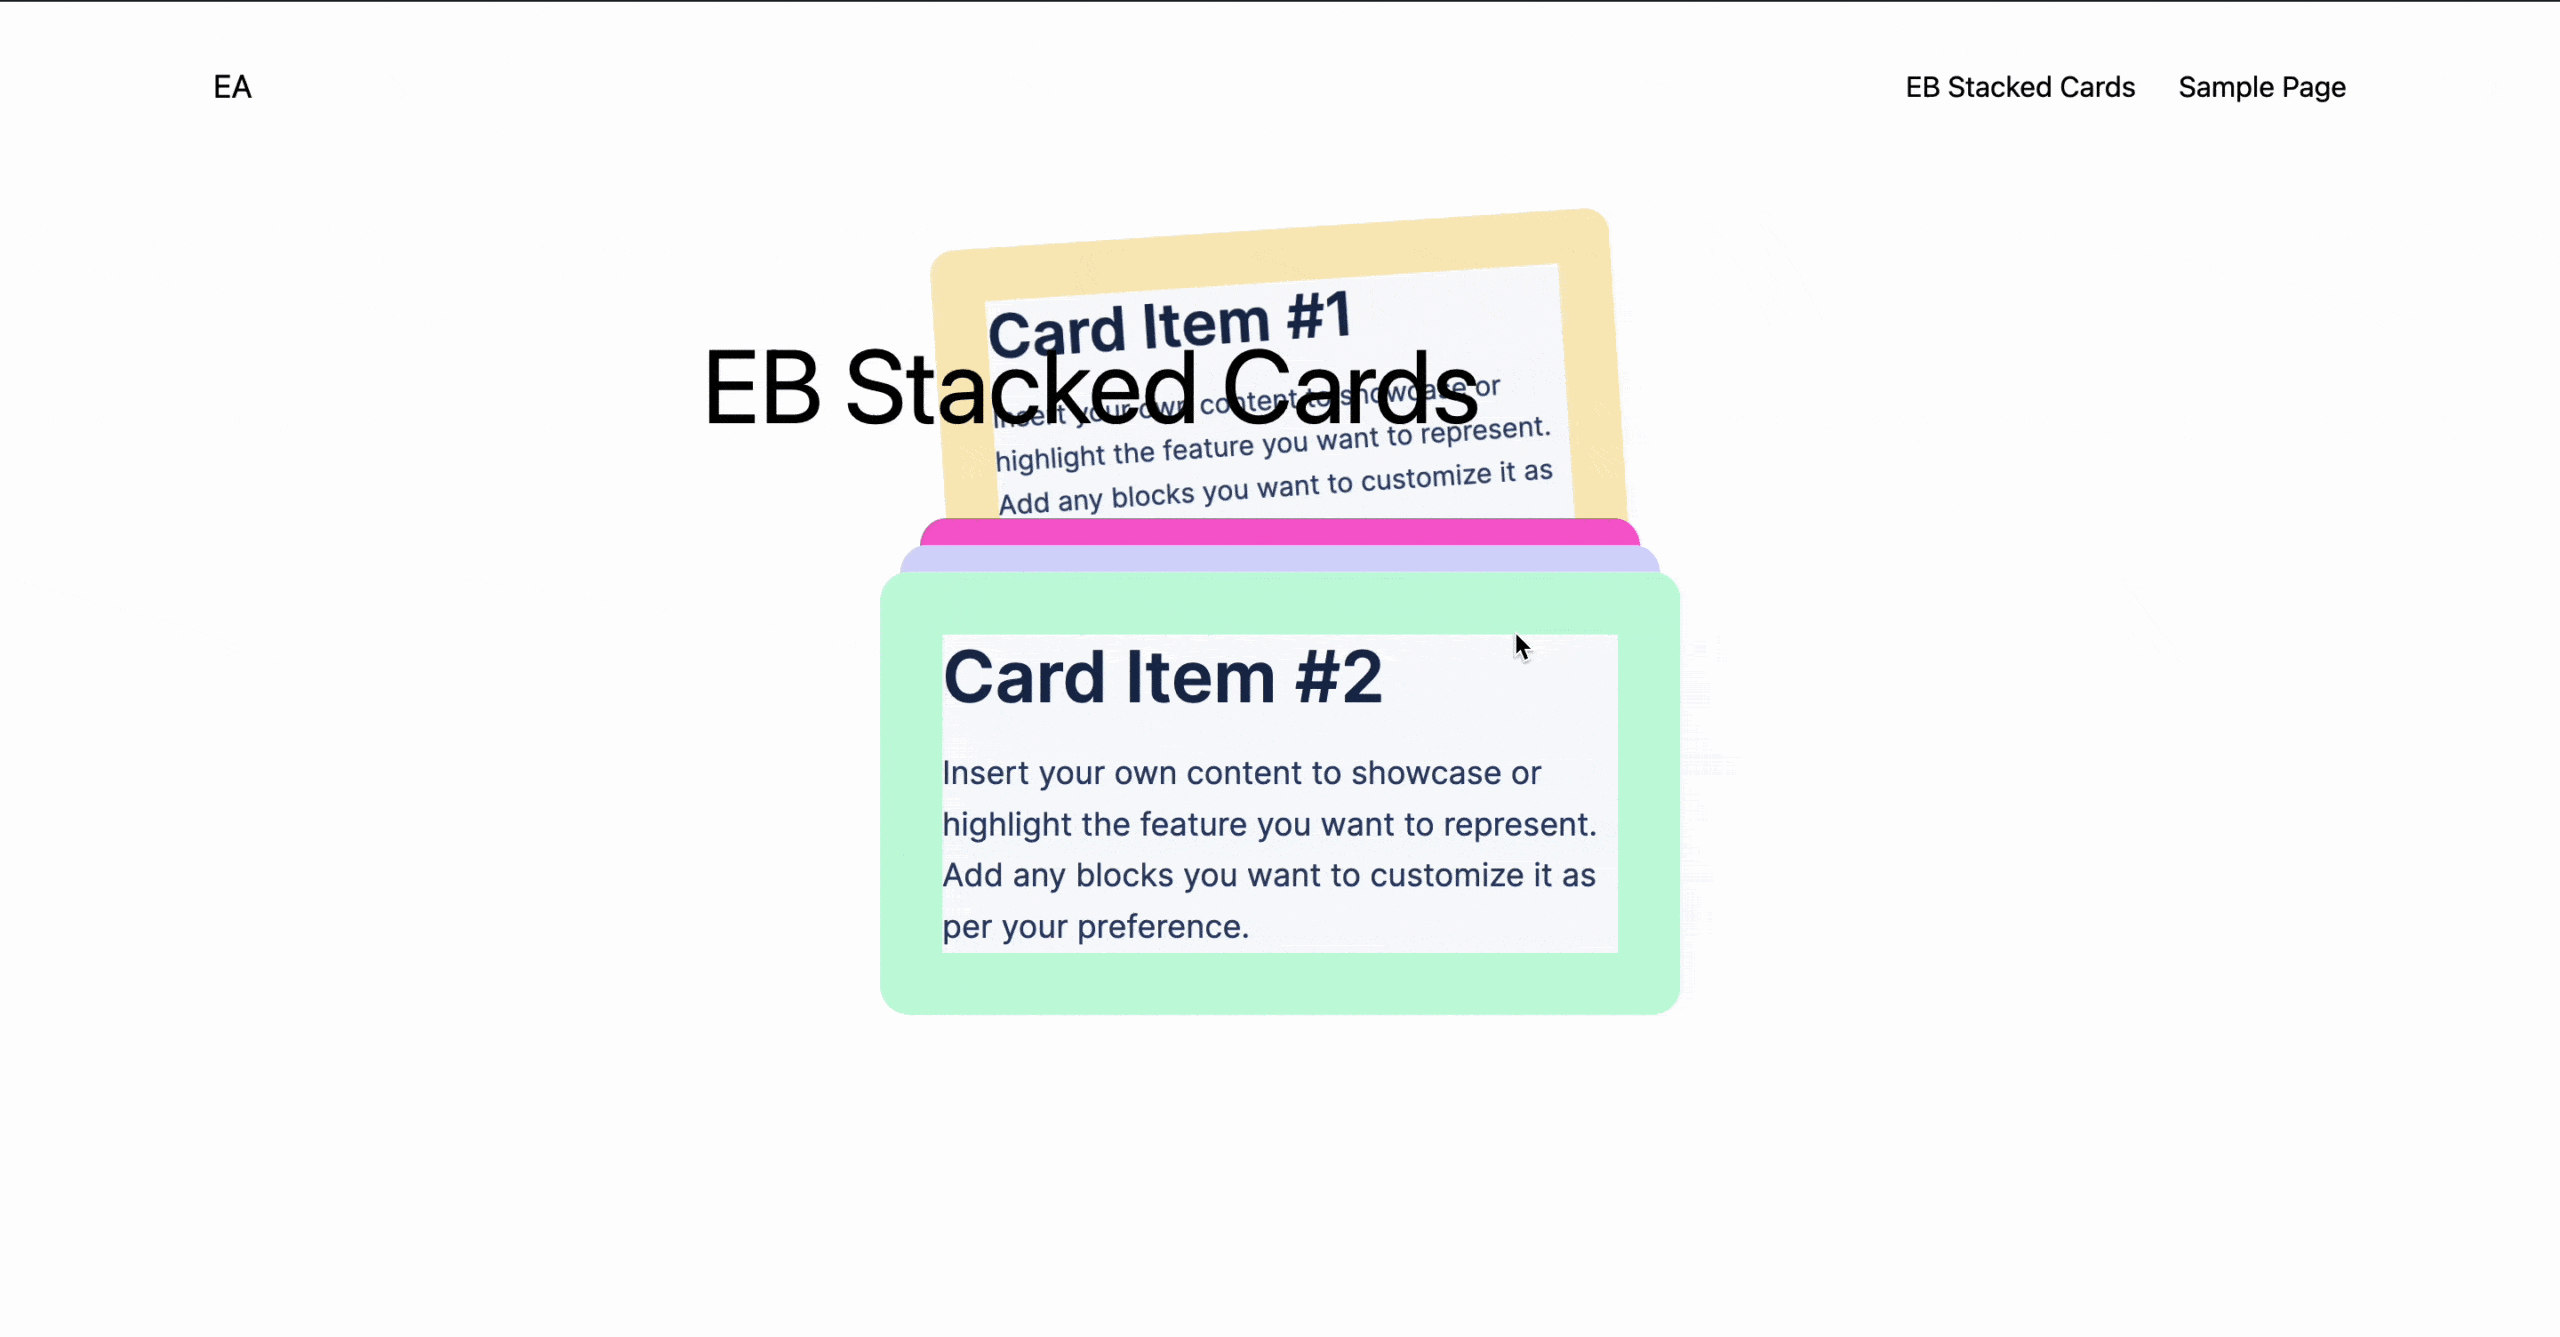 EB Stacked Cards